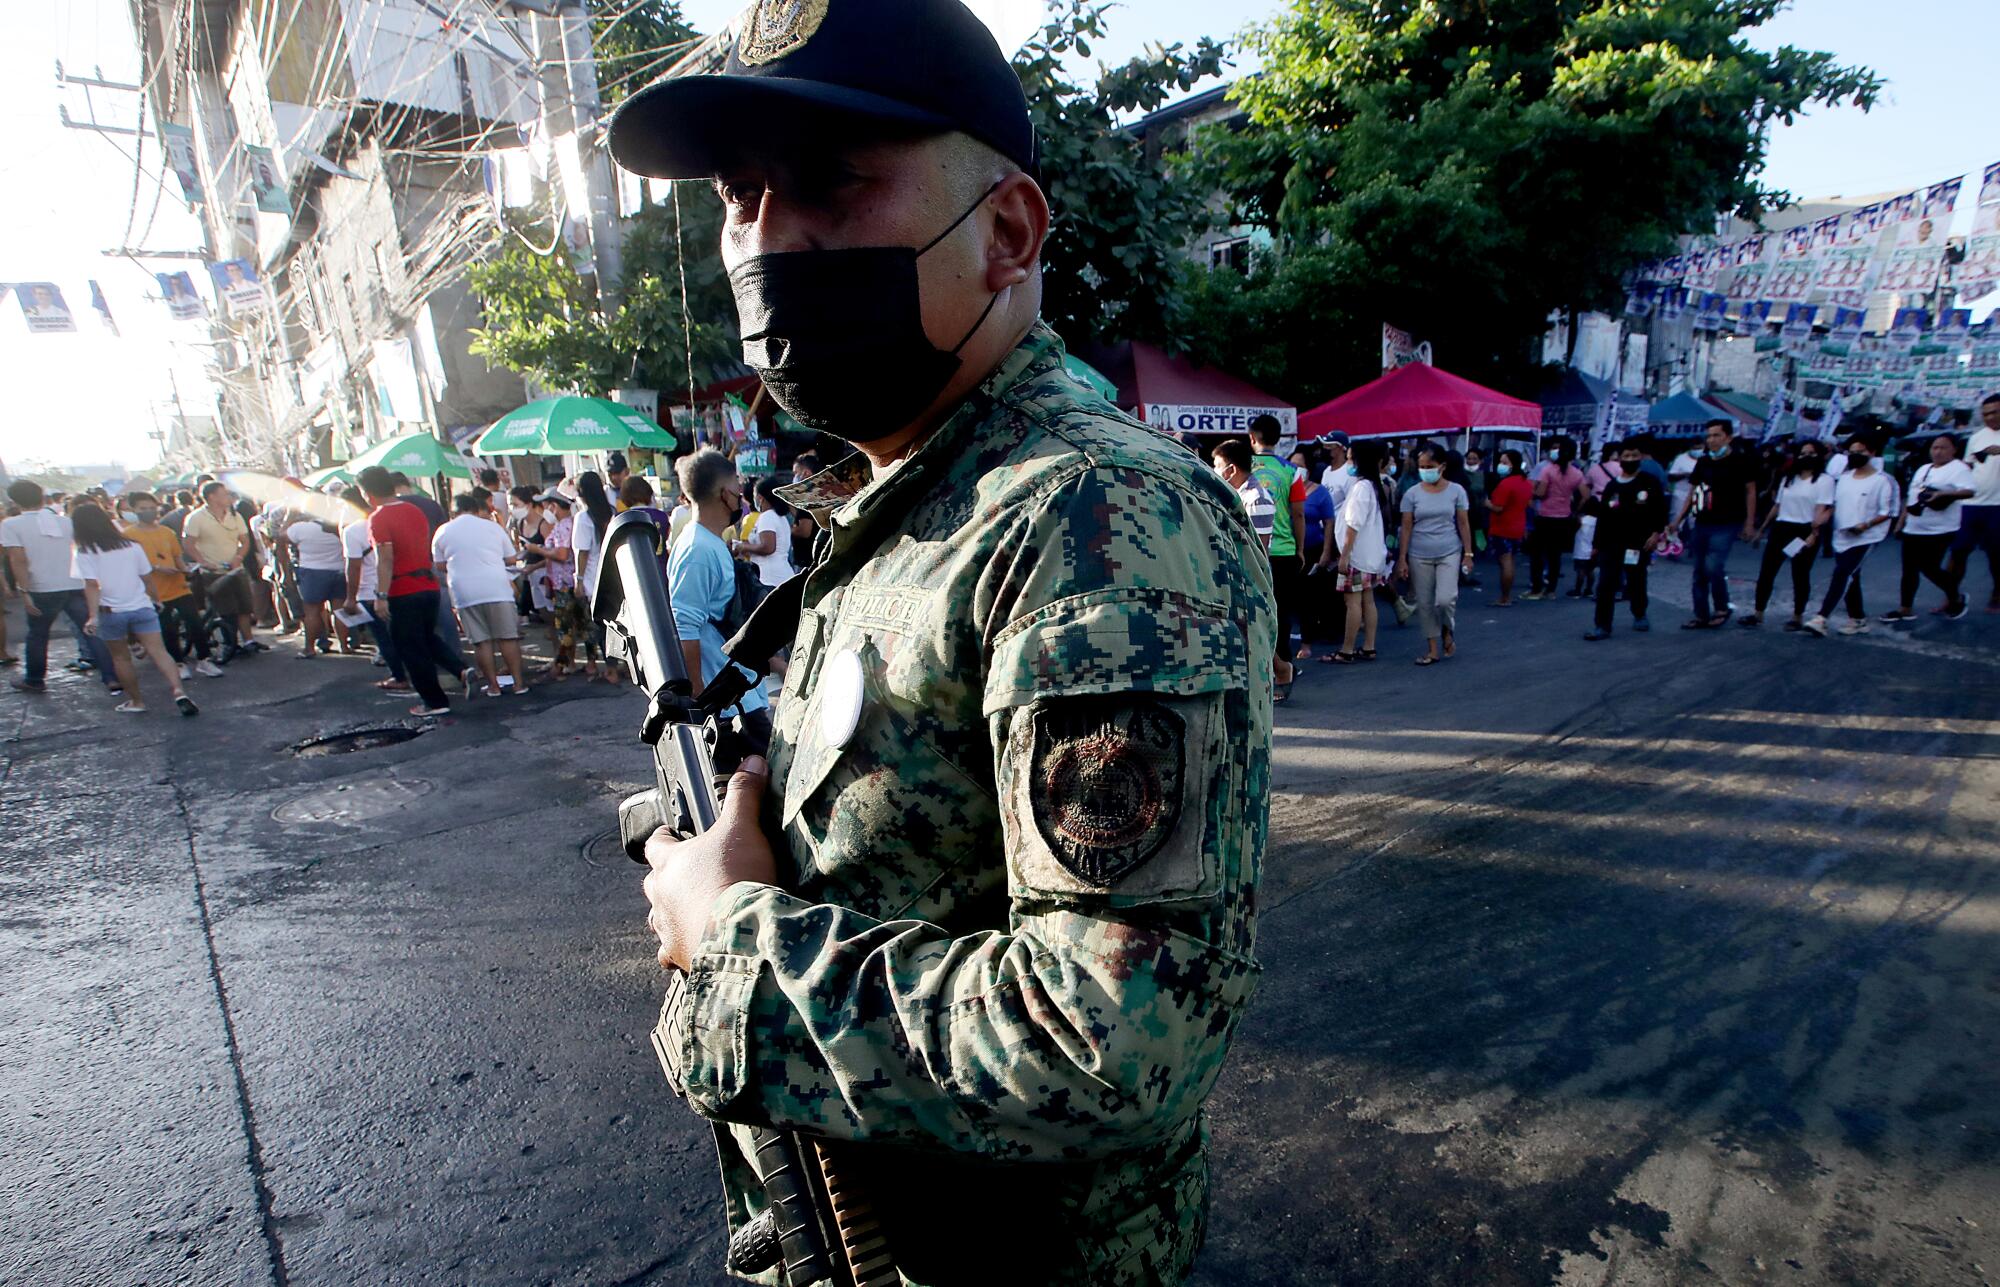 A Philippine National Police officer stands guard as people line up to vote in a neighborhood in the Port of Manila.